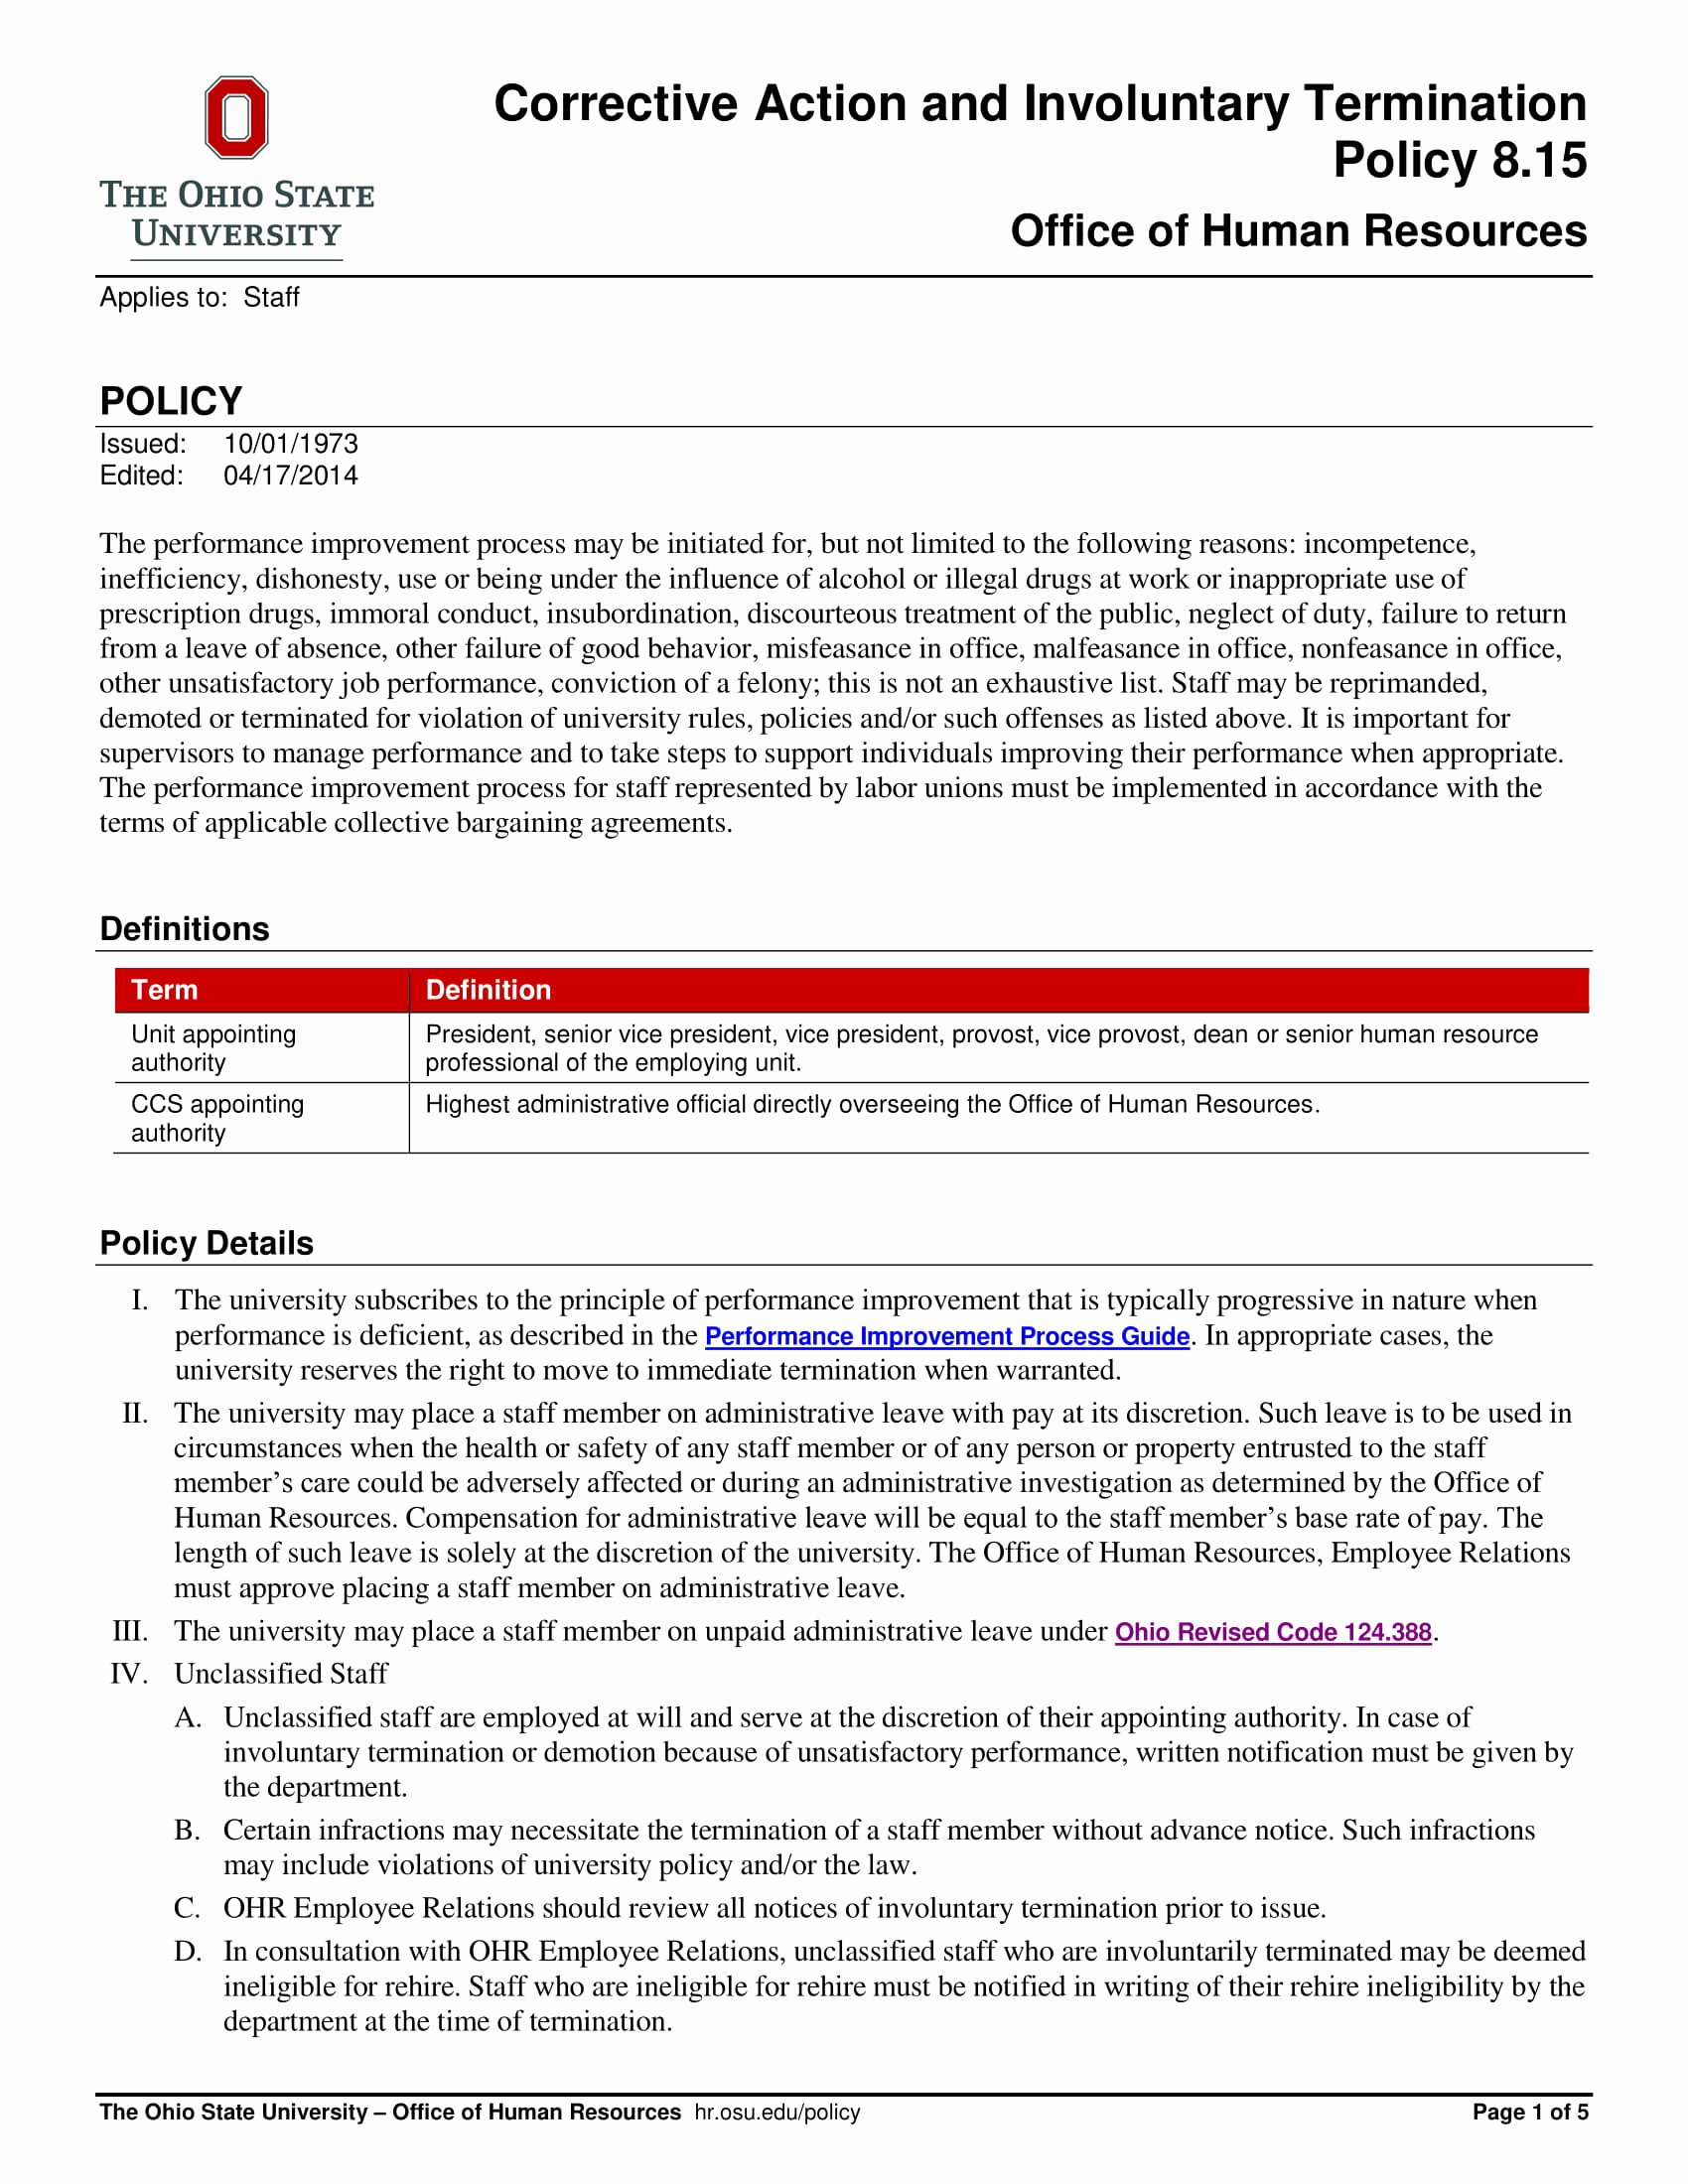 Sample Human Resource Policy Elegant 10 Examples Of Termination Policies and Procedures Pdf